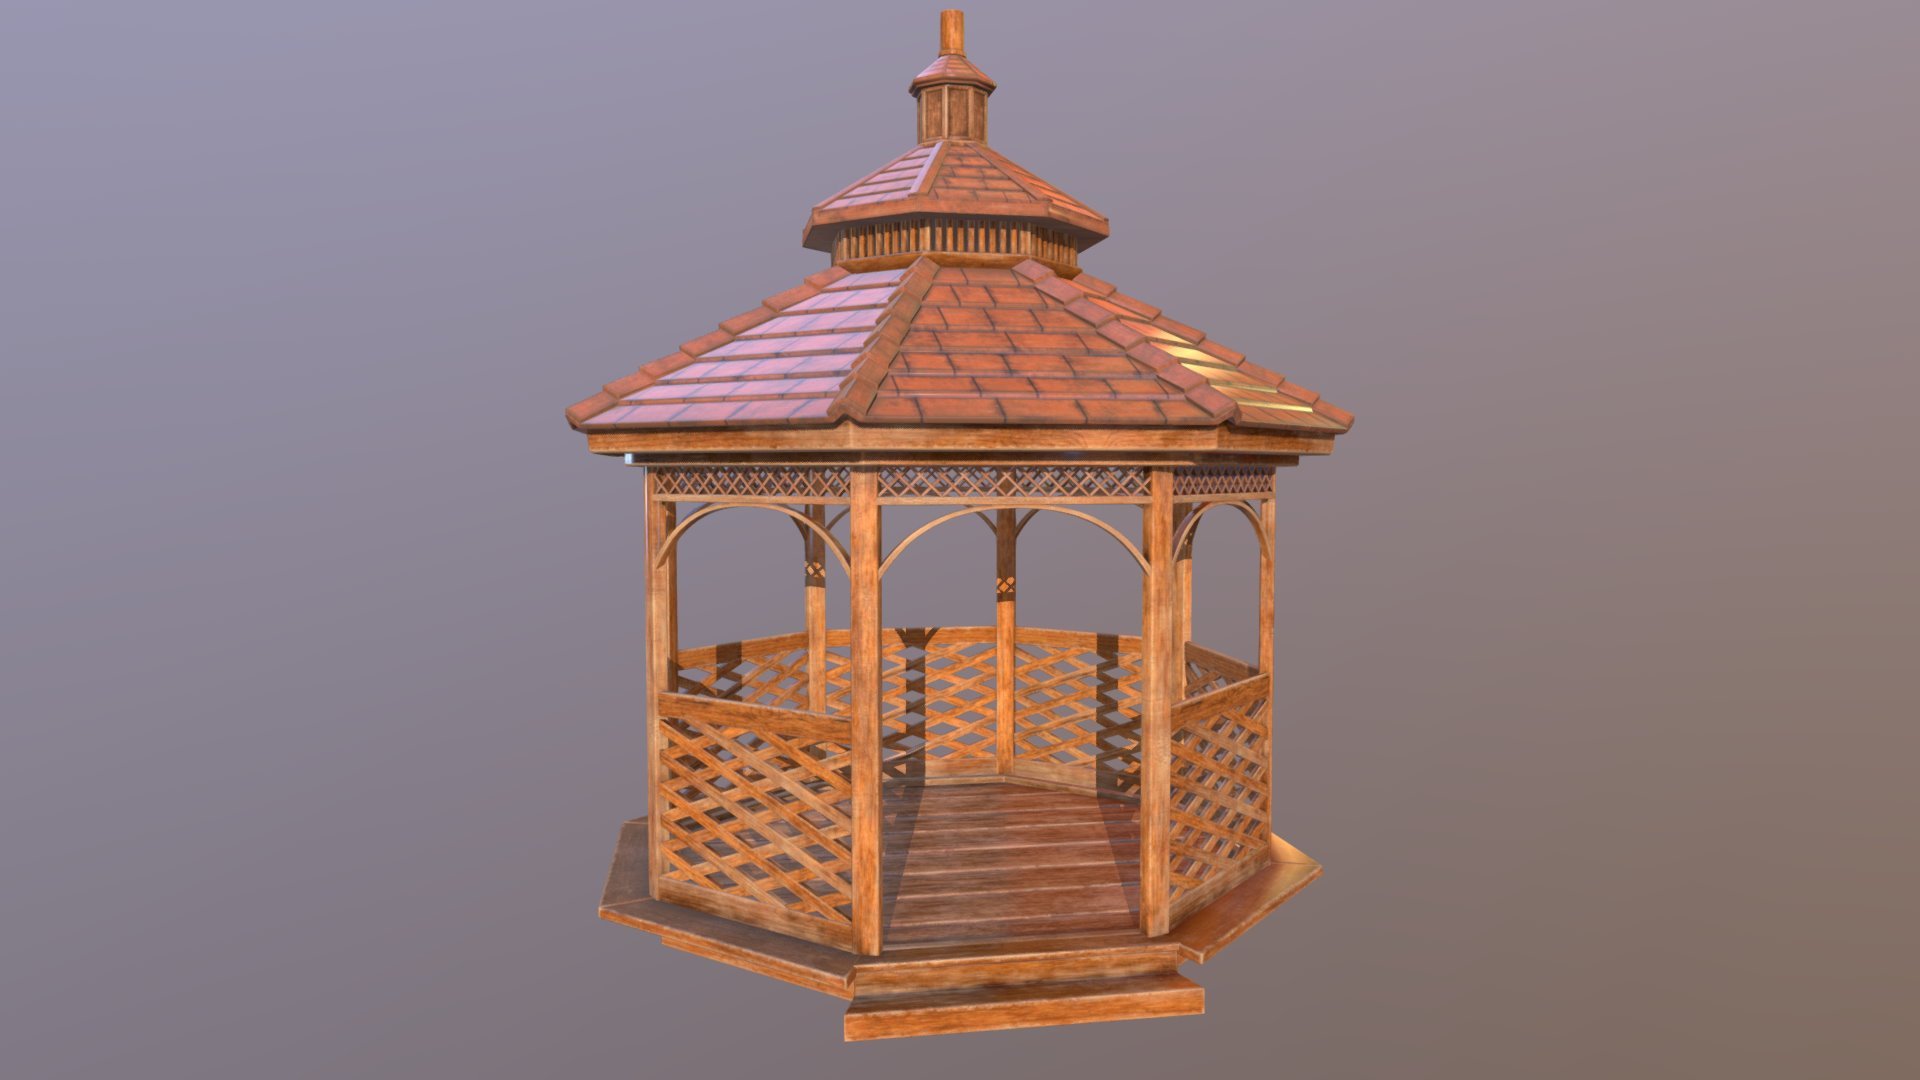 It's a Wooden Gazebo. It's very simple. Use it however you please!  Please enjoy the model and thanks for supporting me and others! - Wooden Gazebo - 3D model by HardzGal 3d model